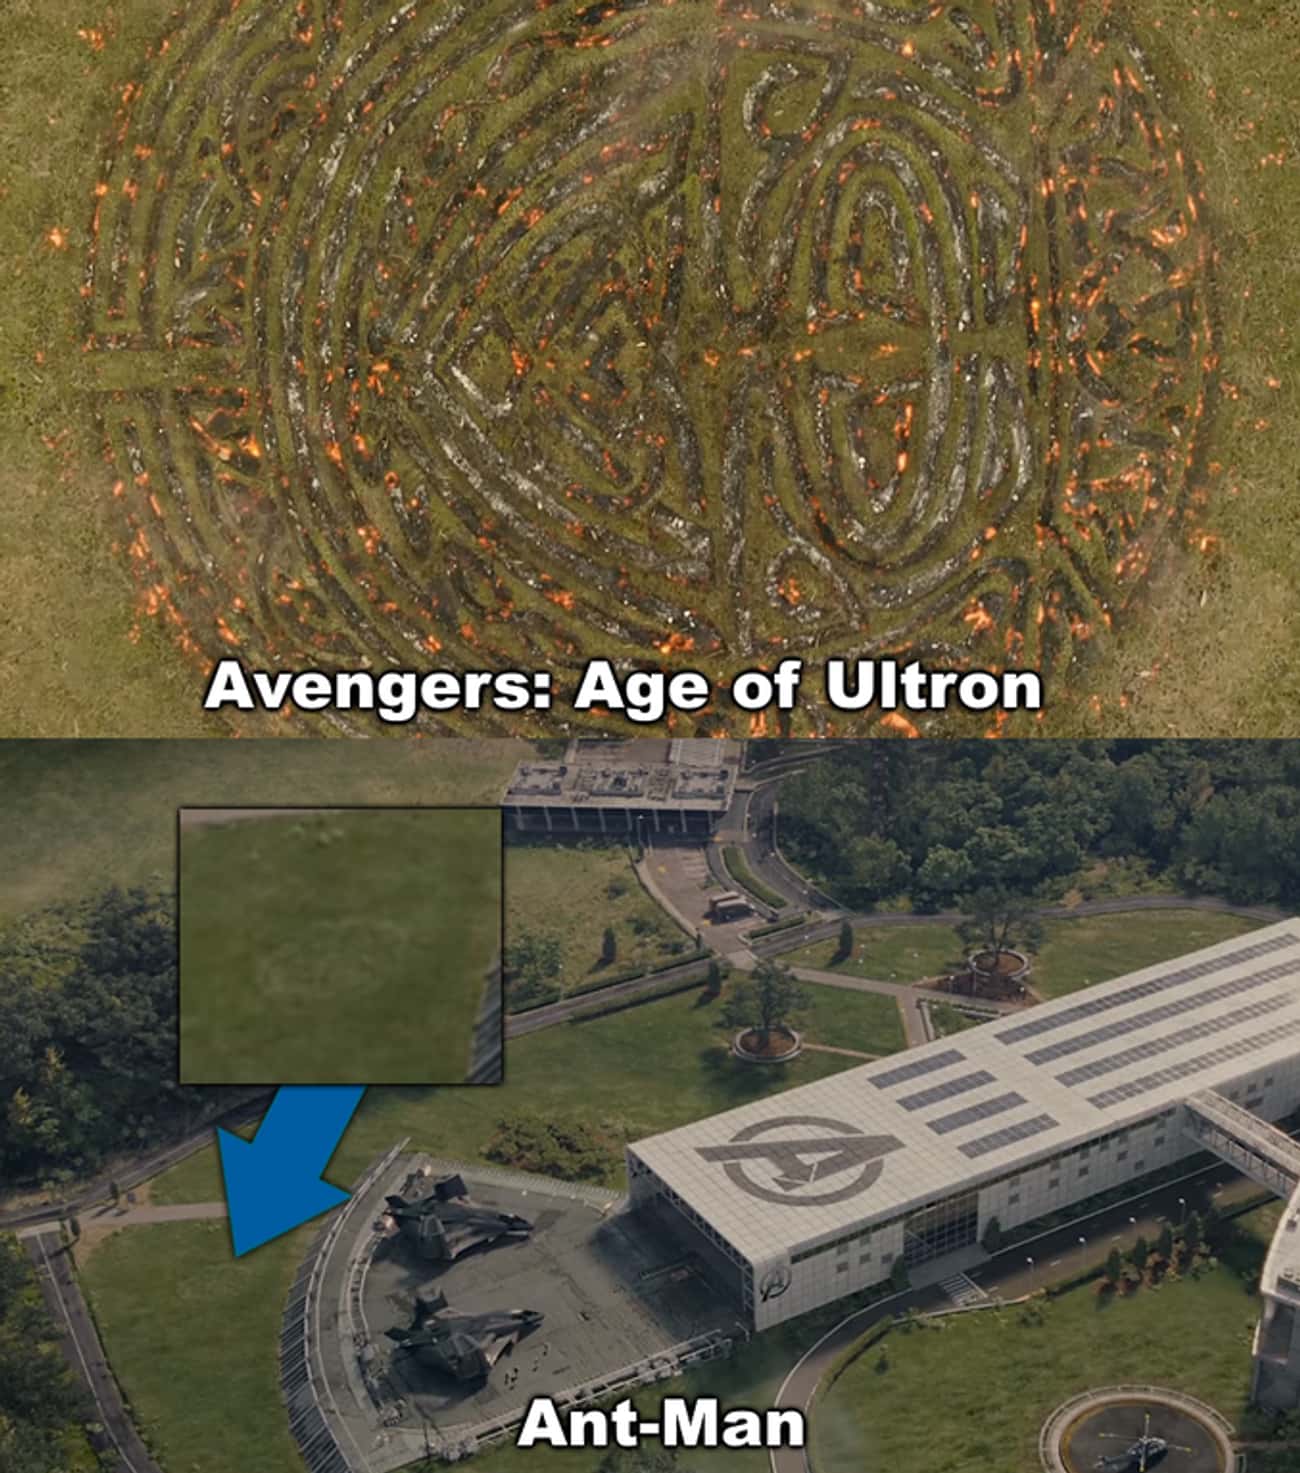 A shot of the symbol Thor left in the grass upon returning to Asgard at the end of 'Avengers: Age of Ultron' can be seen when Scott visits the Avengers Campus.